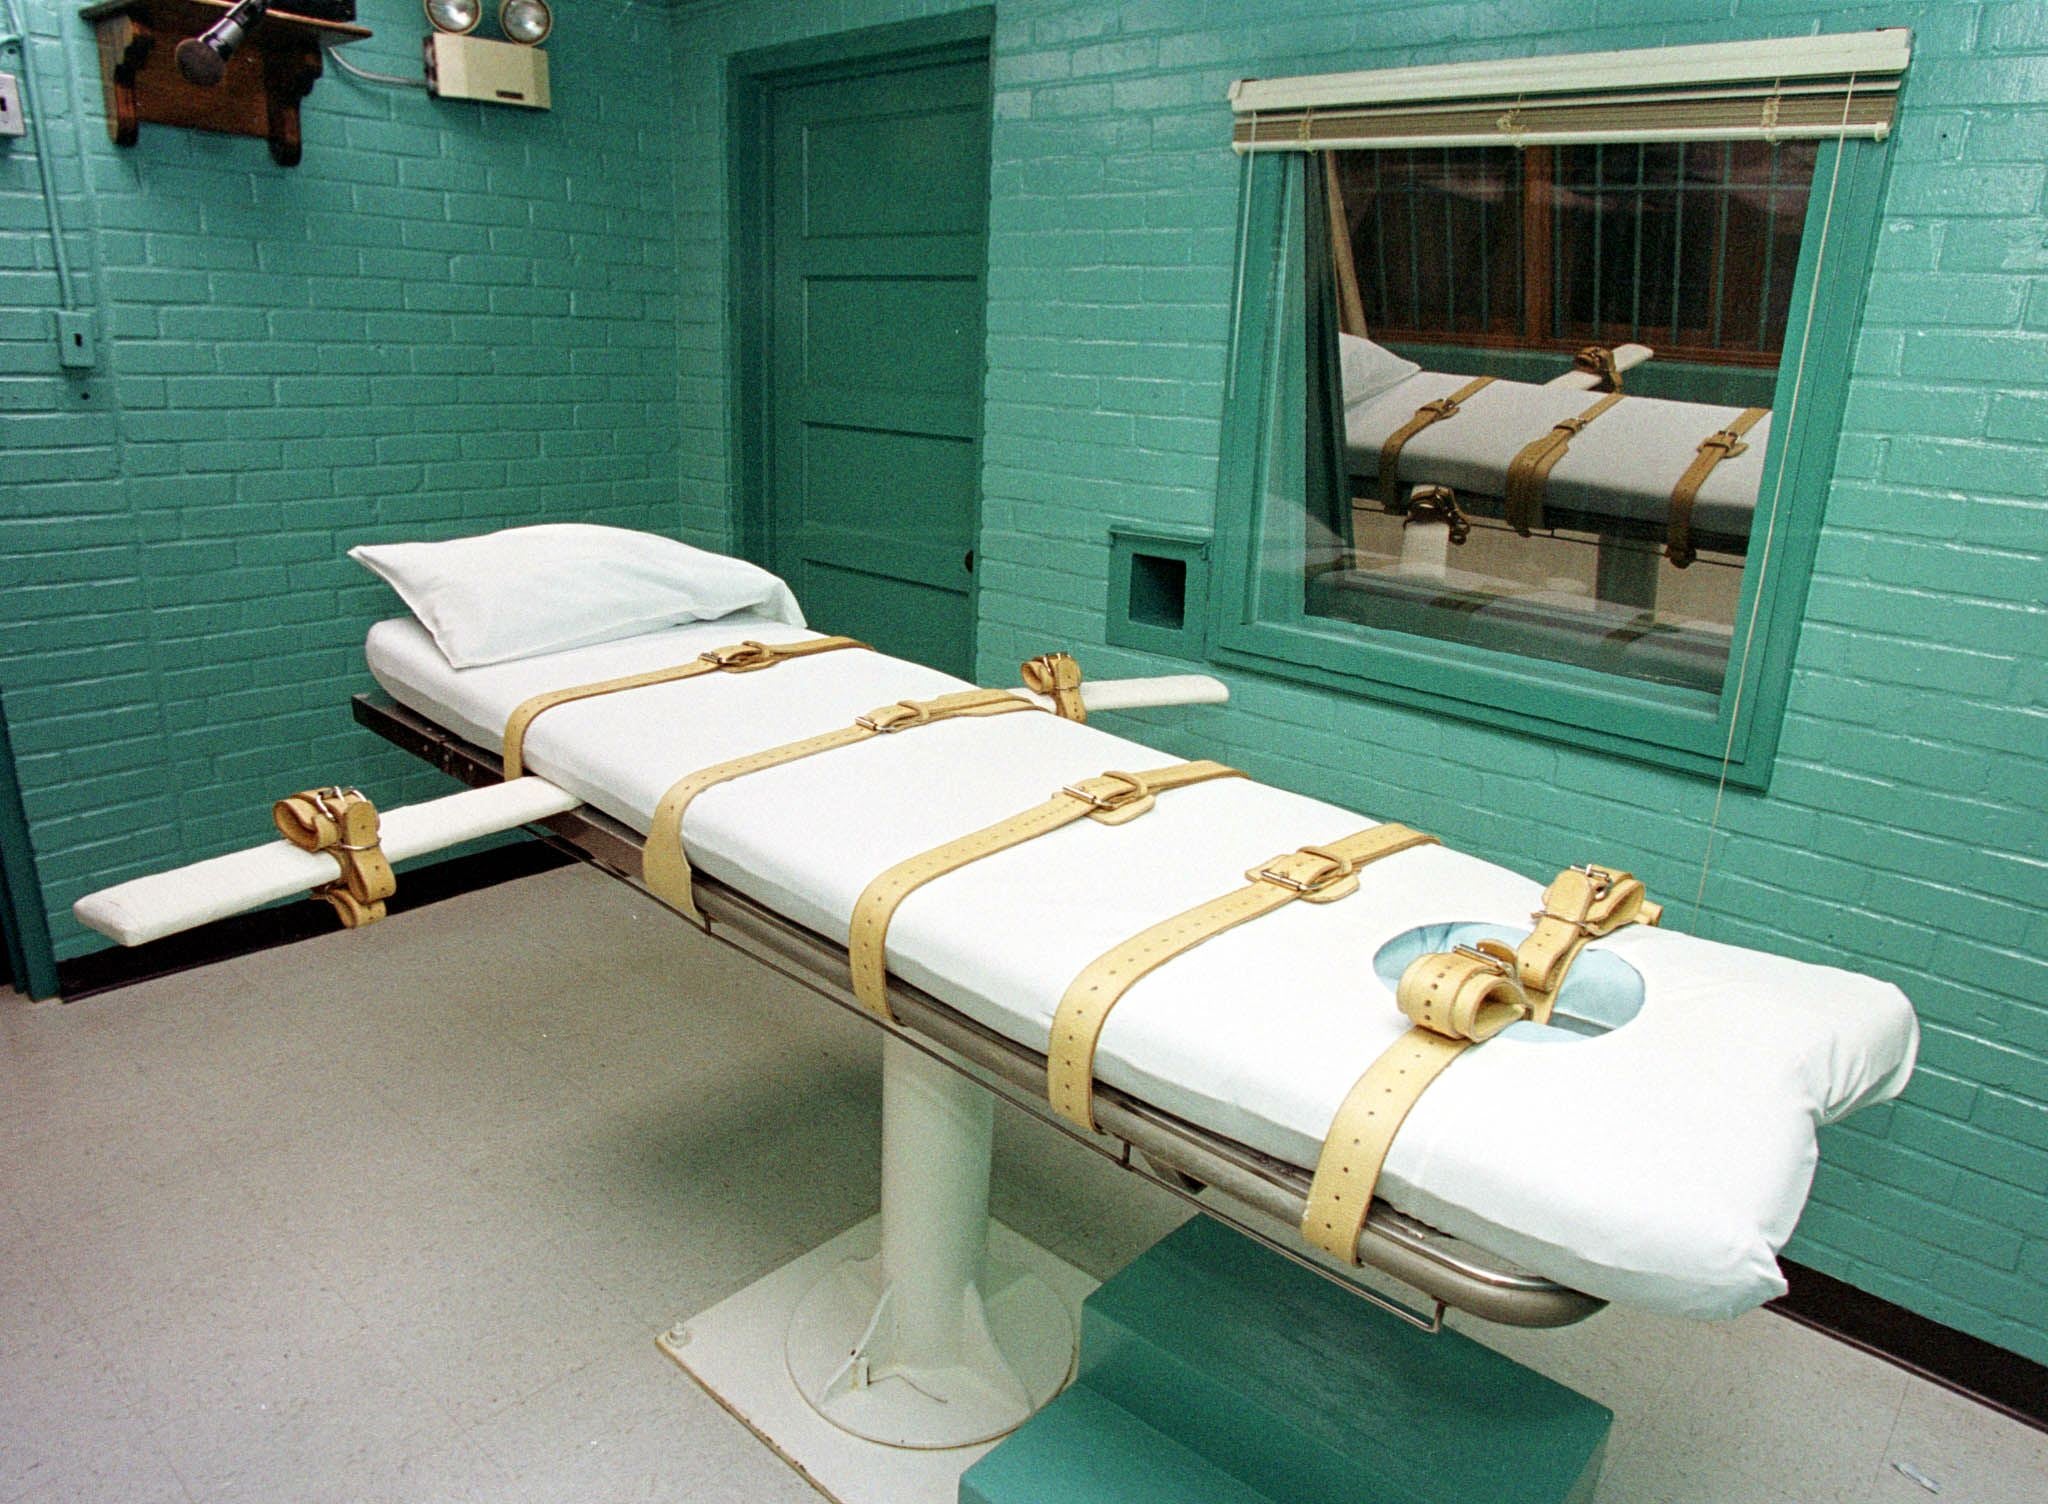 A “death chamber” used for an execution in Huntsville, Texas back in 2000.